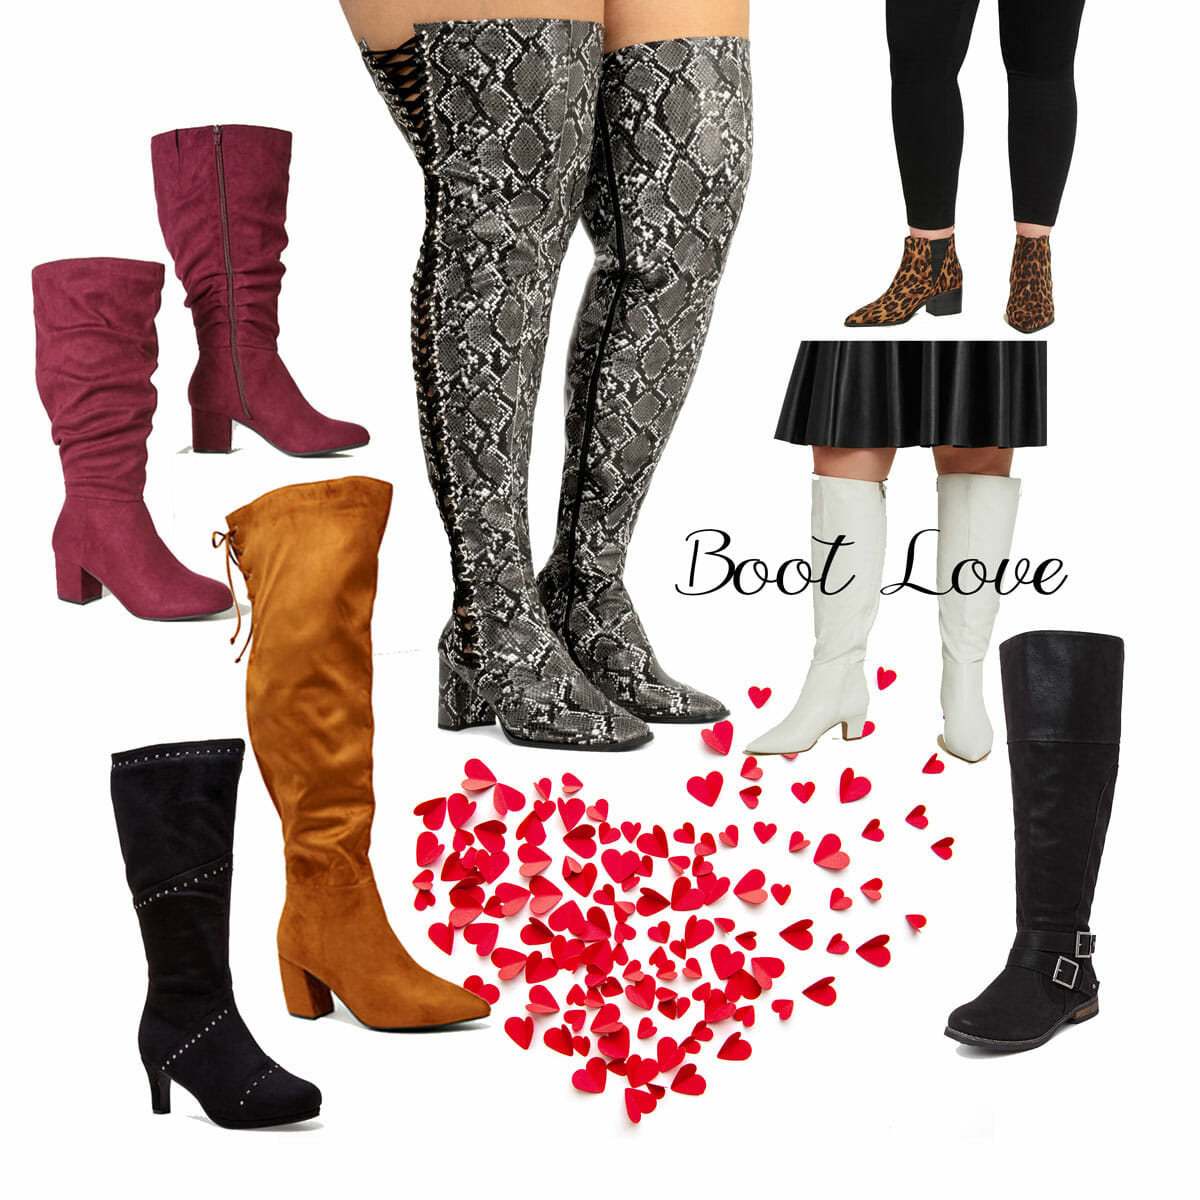 How to Find Wide-Calf Boots That Fit 